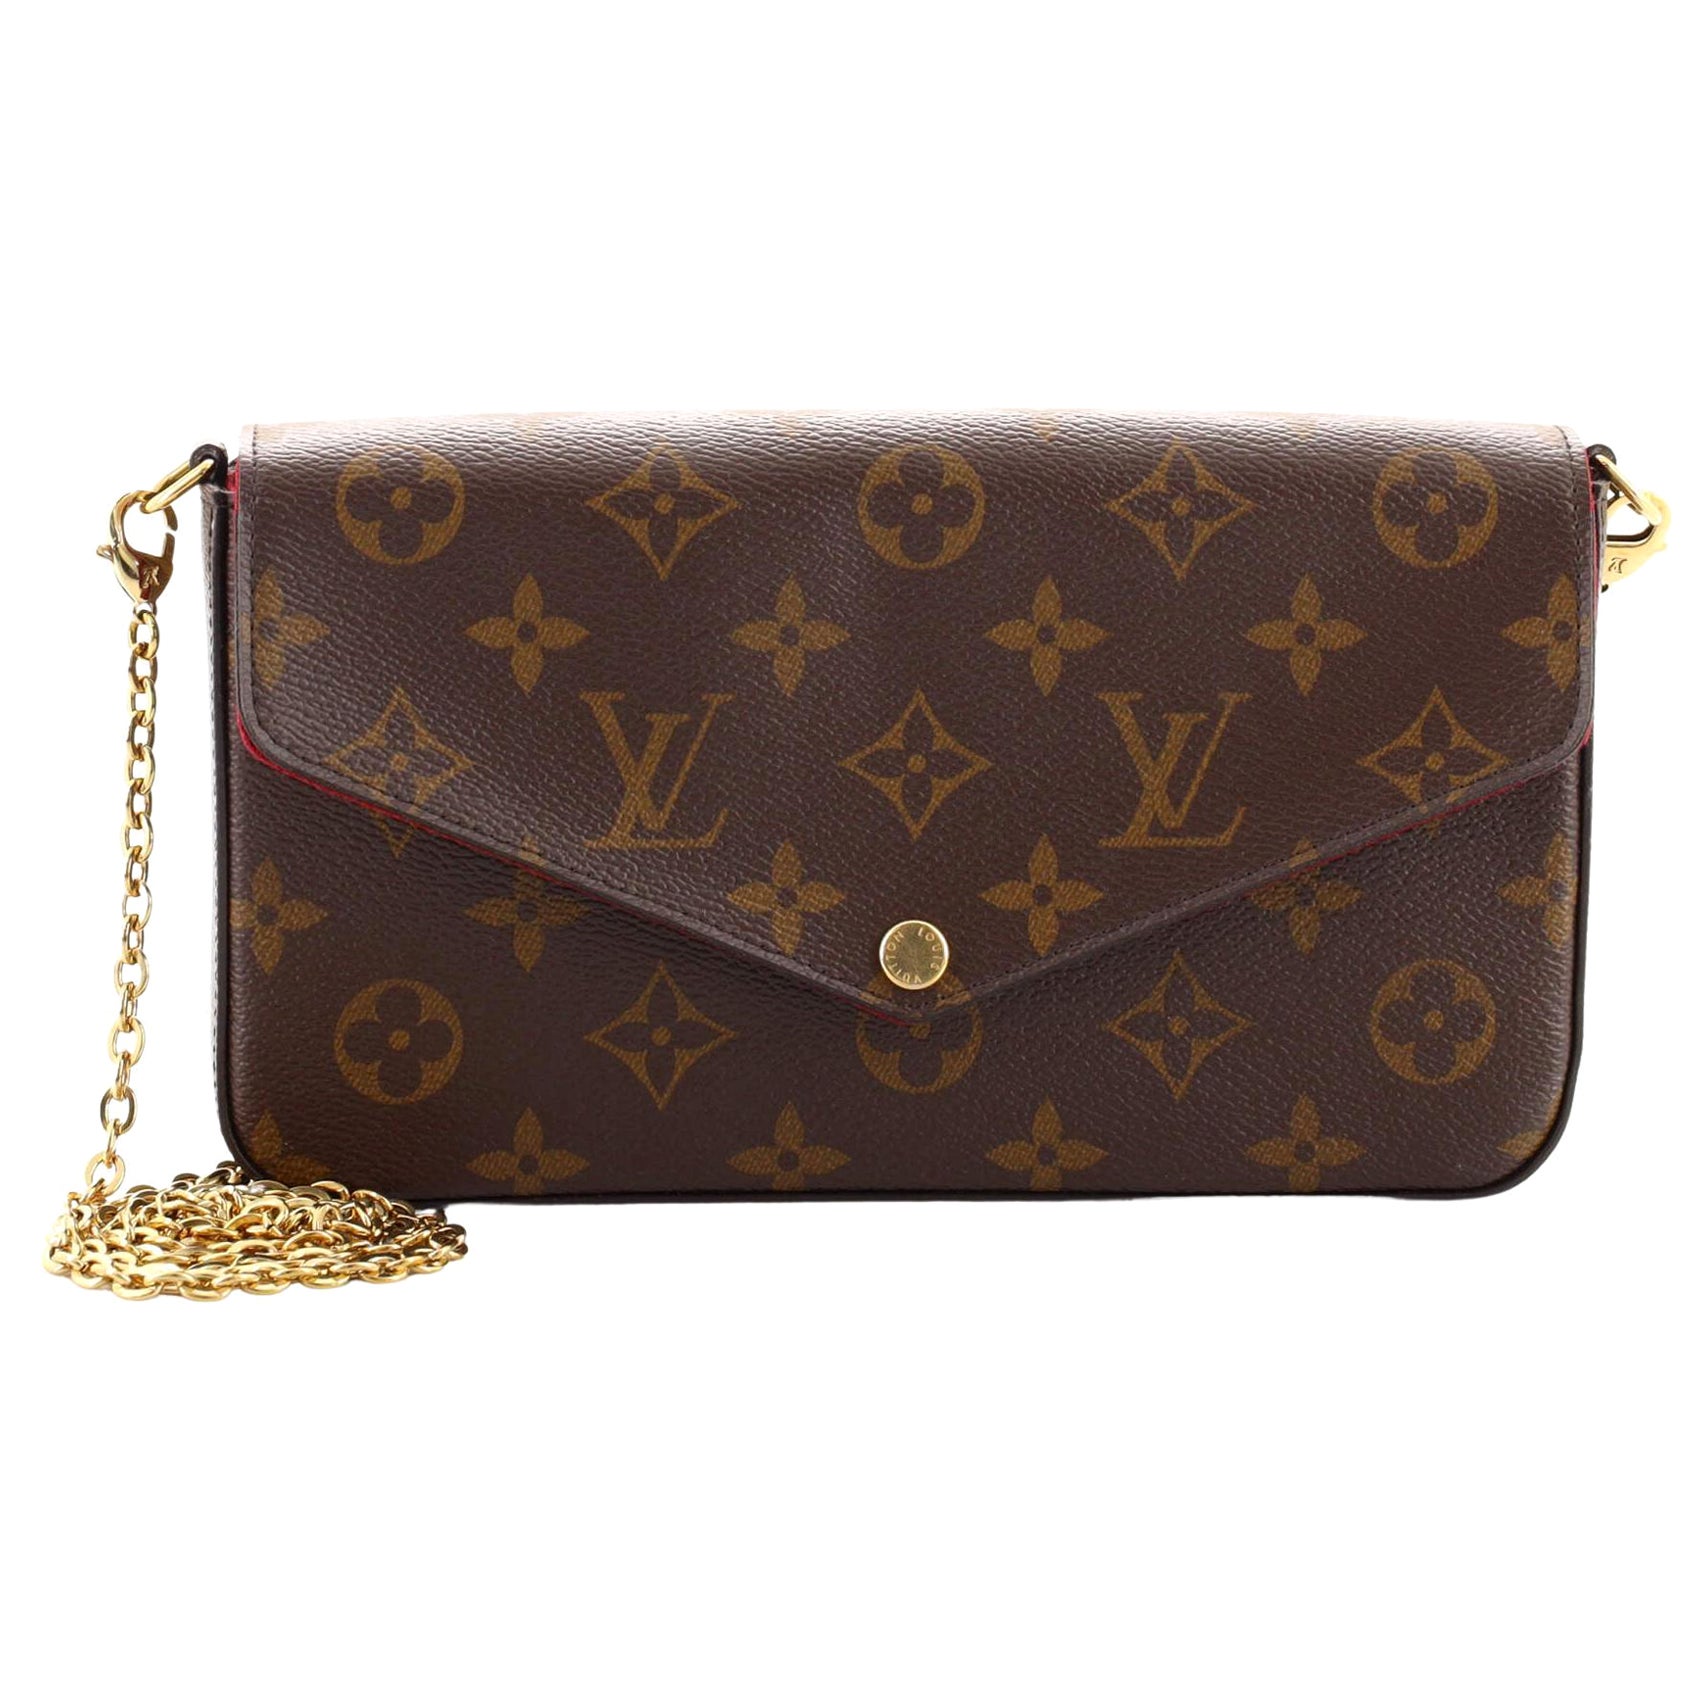 The Louis Vuitton Pochette Felicie - a small but mighty bag! 